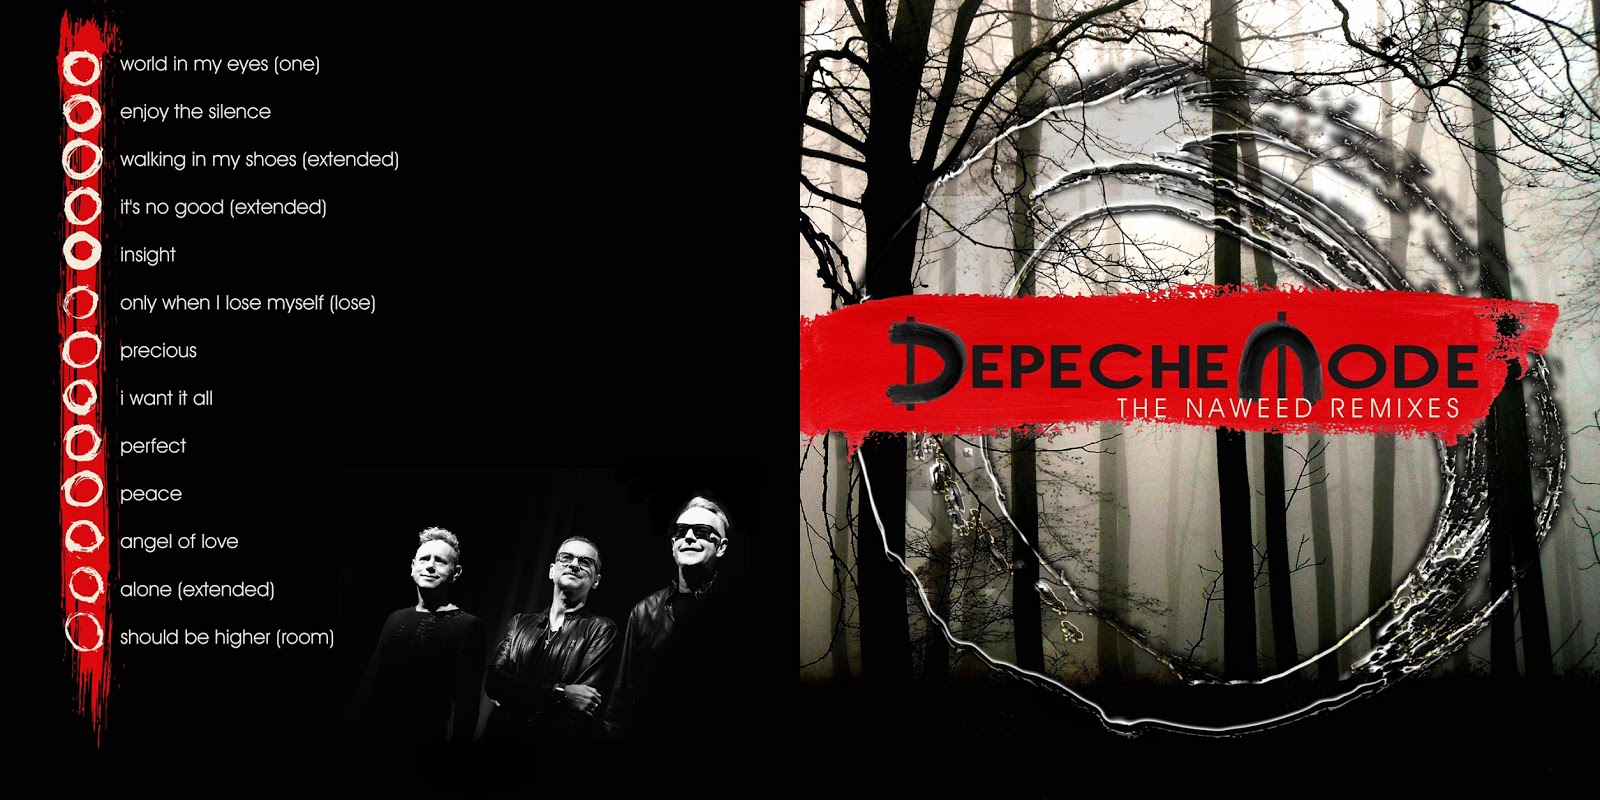 depeche mode discography mp3 torrent download